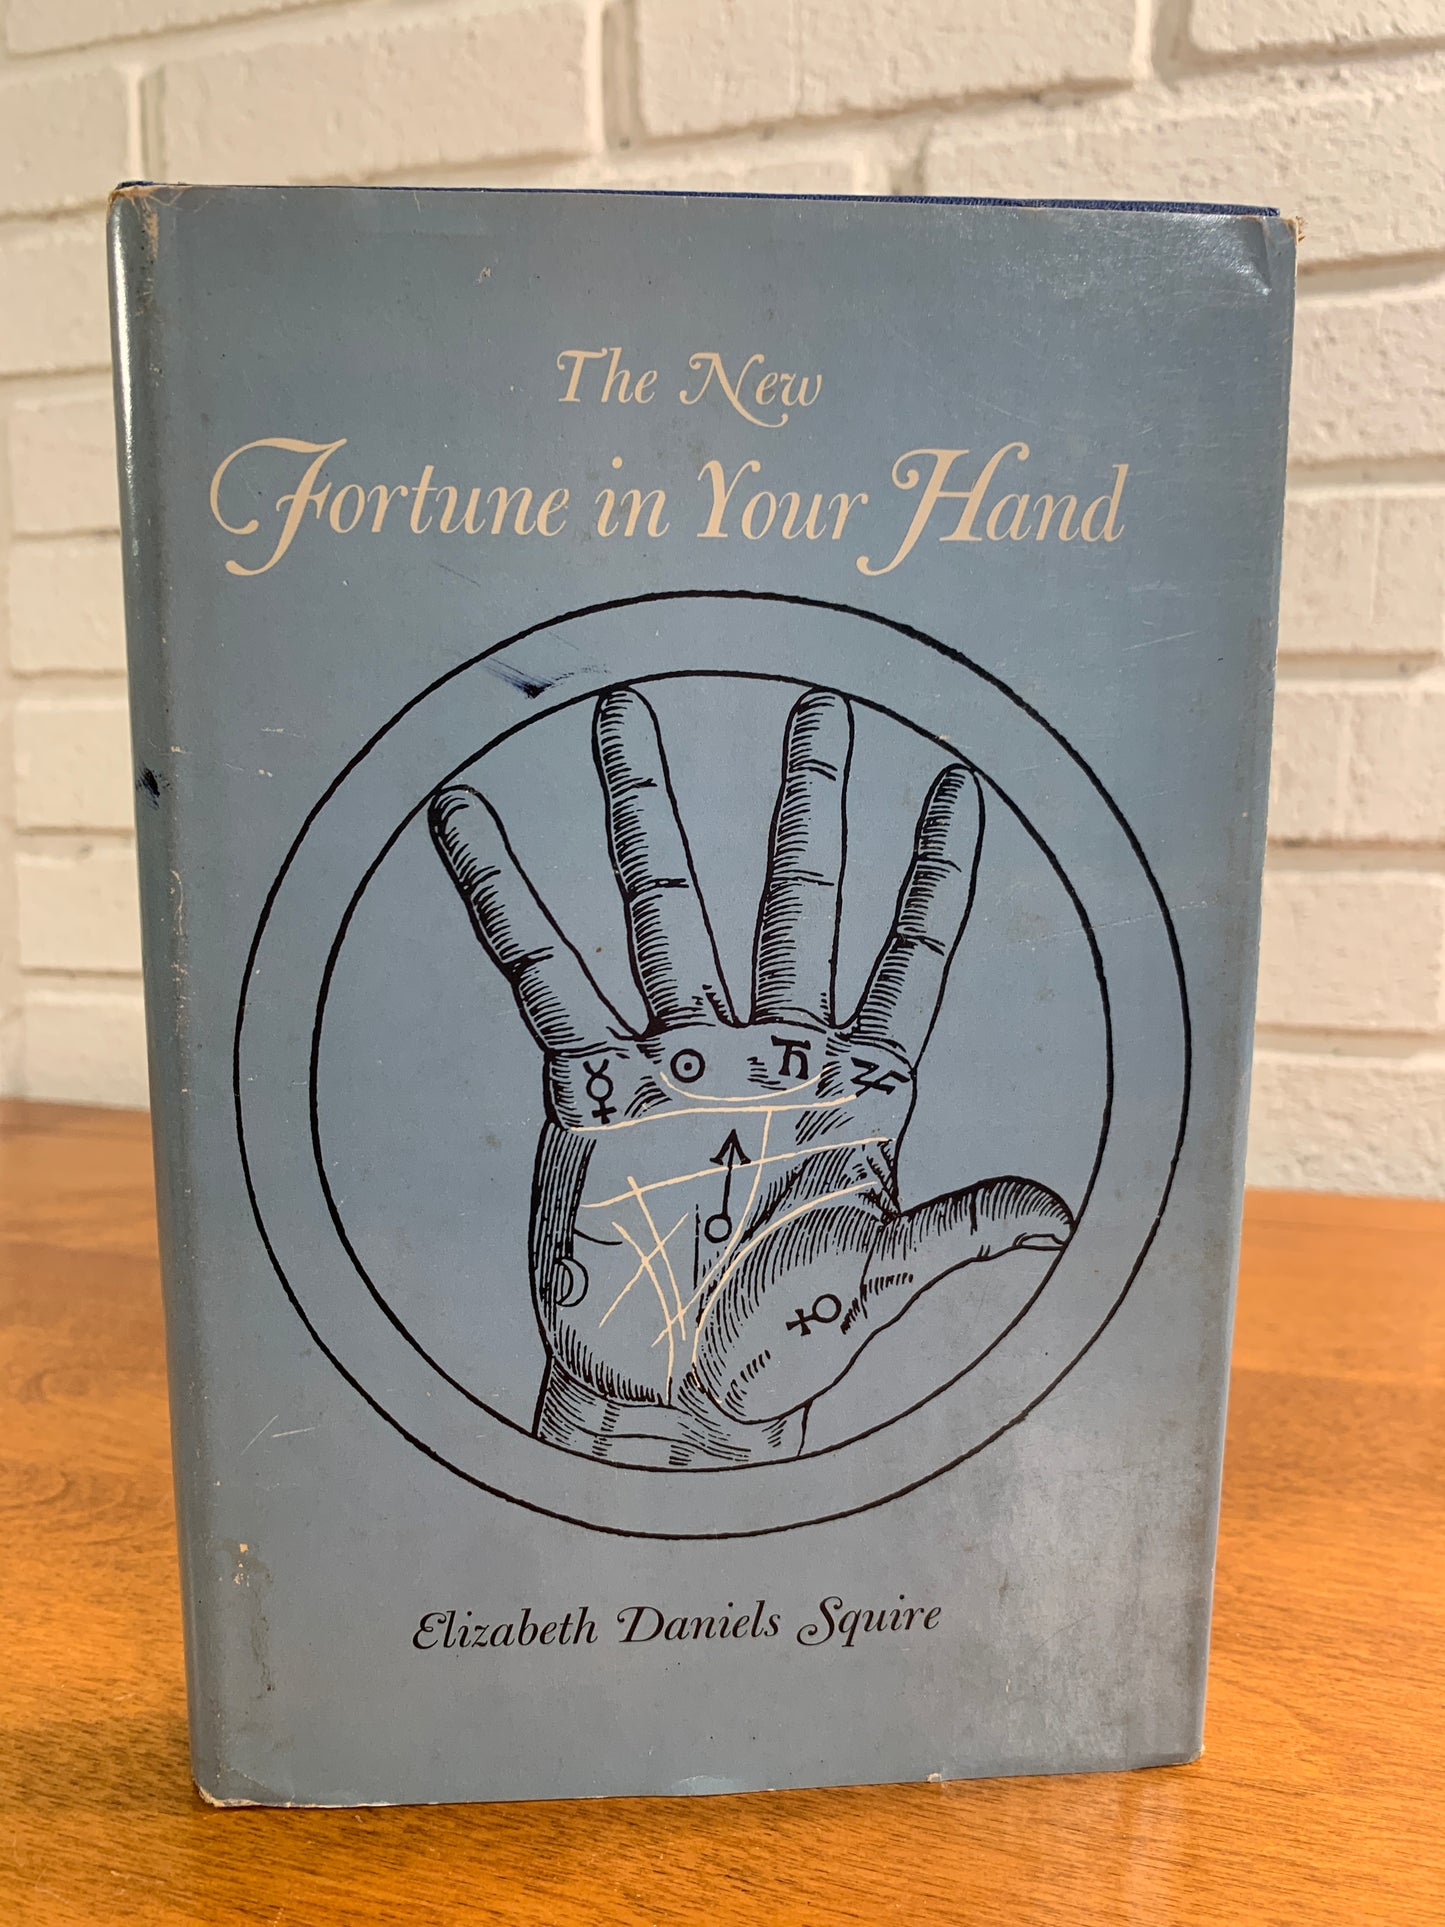 The New Fortune in Your Hand by Elizabeth Daniels Squire [1960]